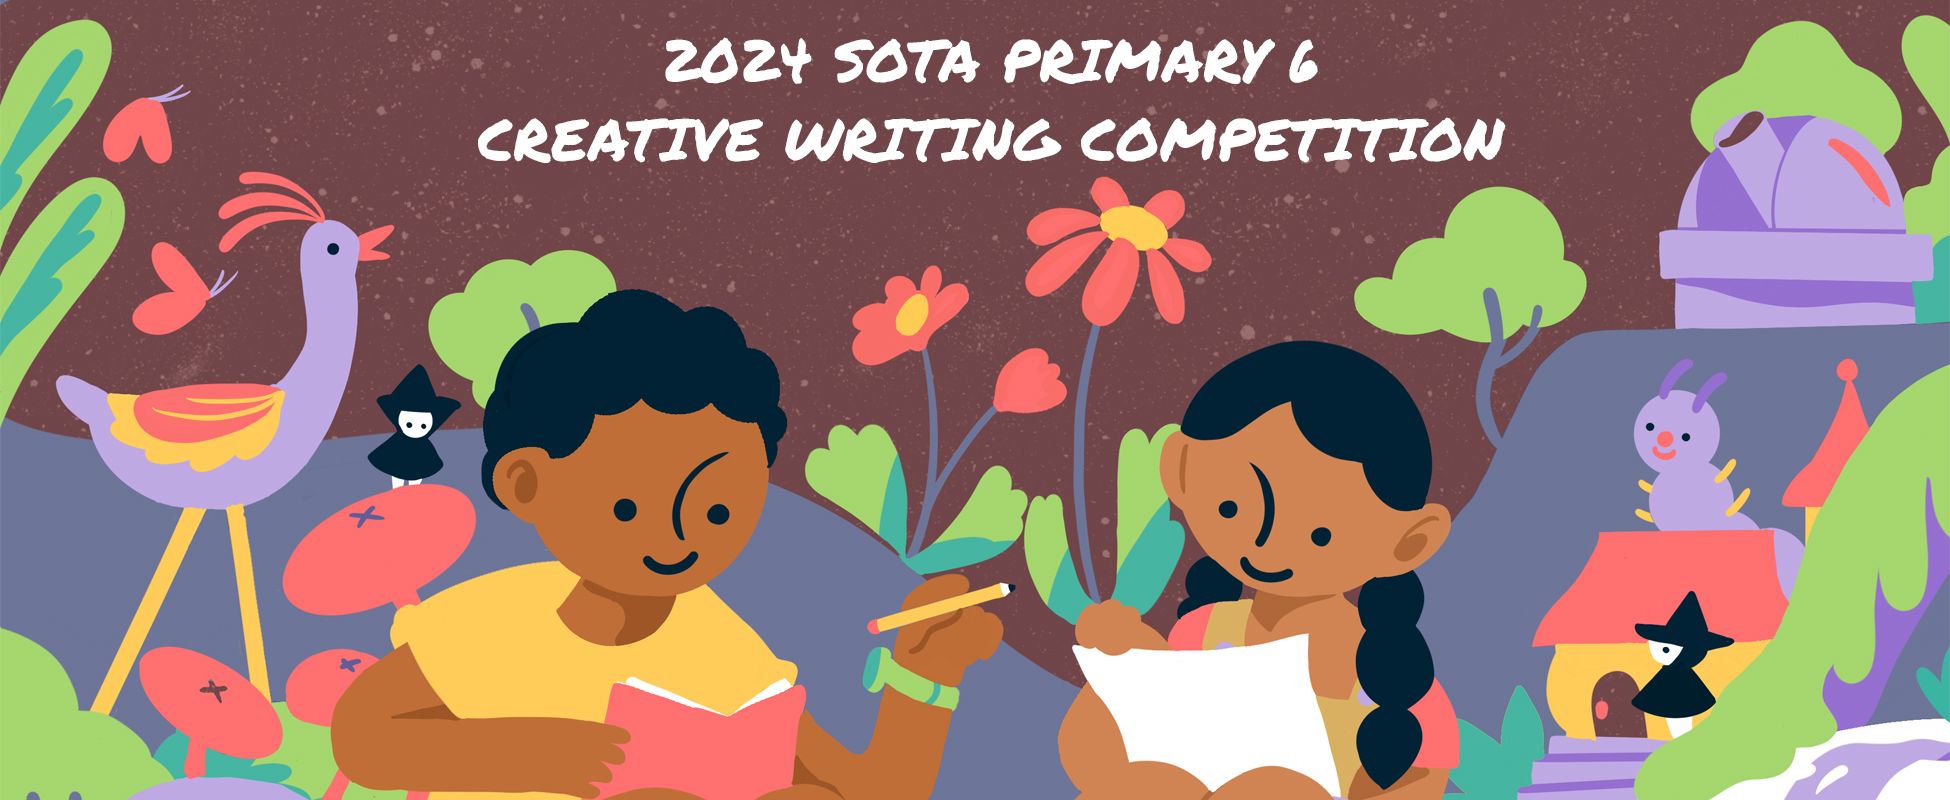 sota primary 6 creative writing competition 2021